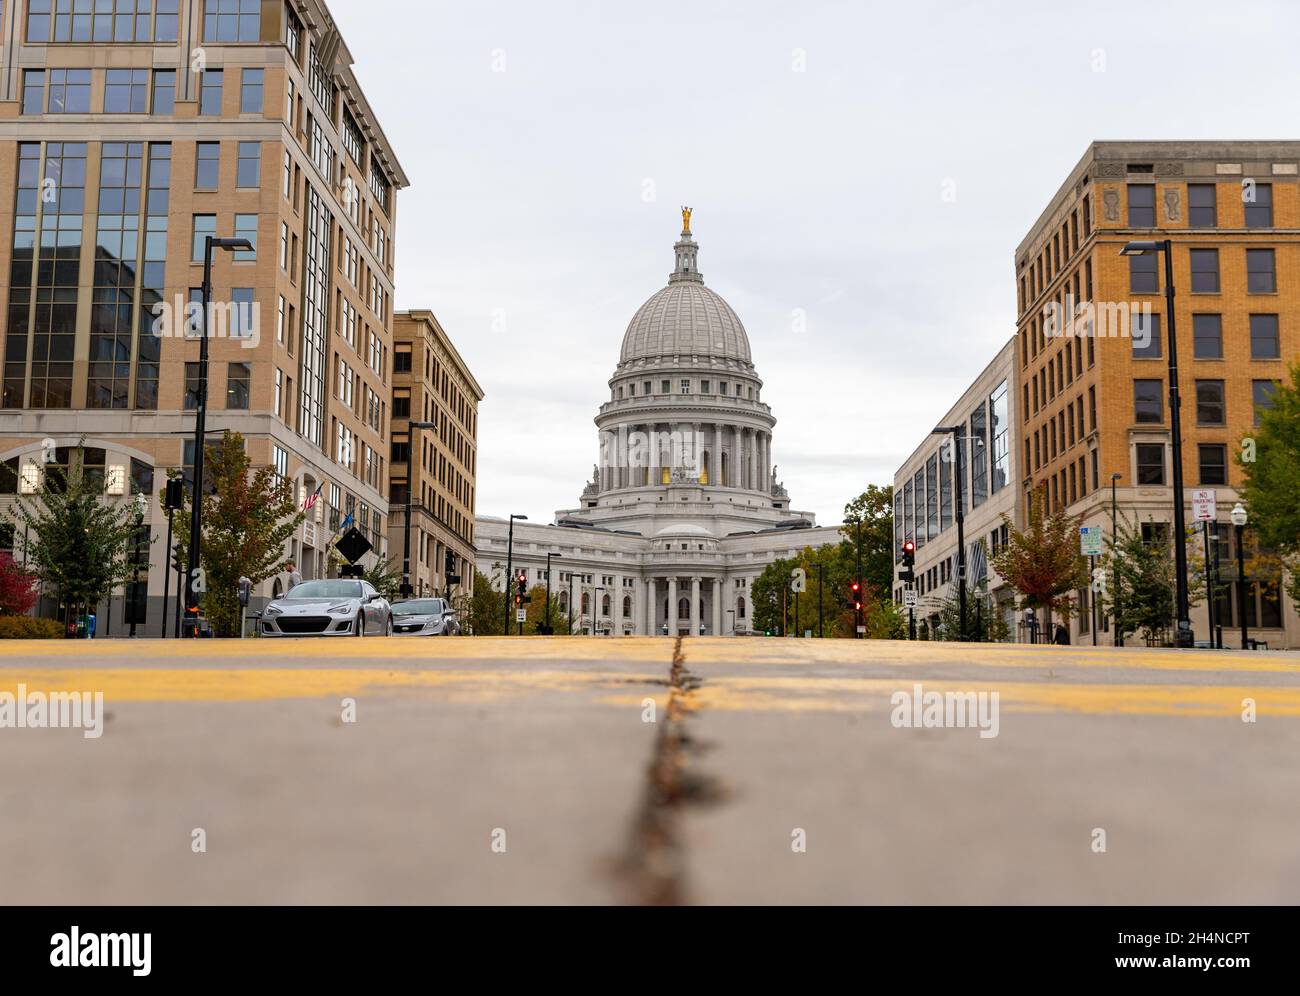 Madison, WI - October 29, 2021: The Wisconsin State Capitol Building Stock Photo